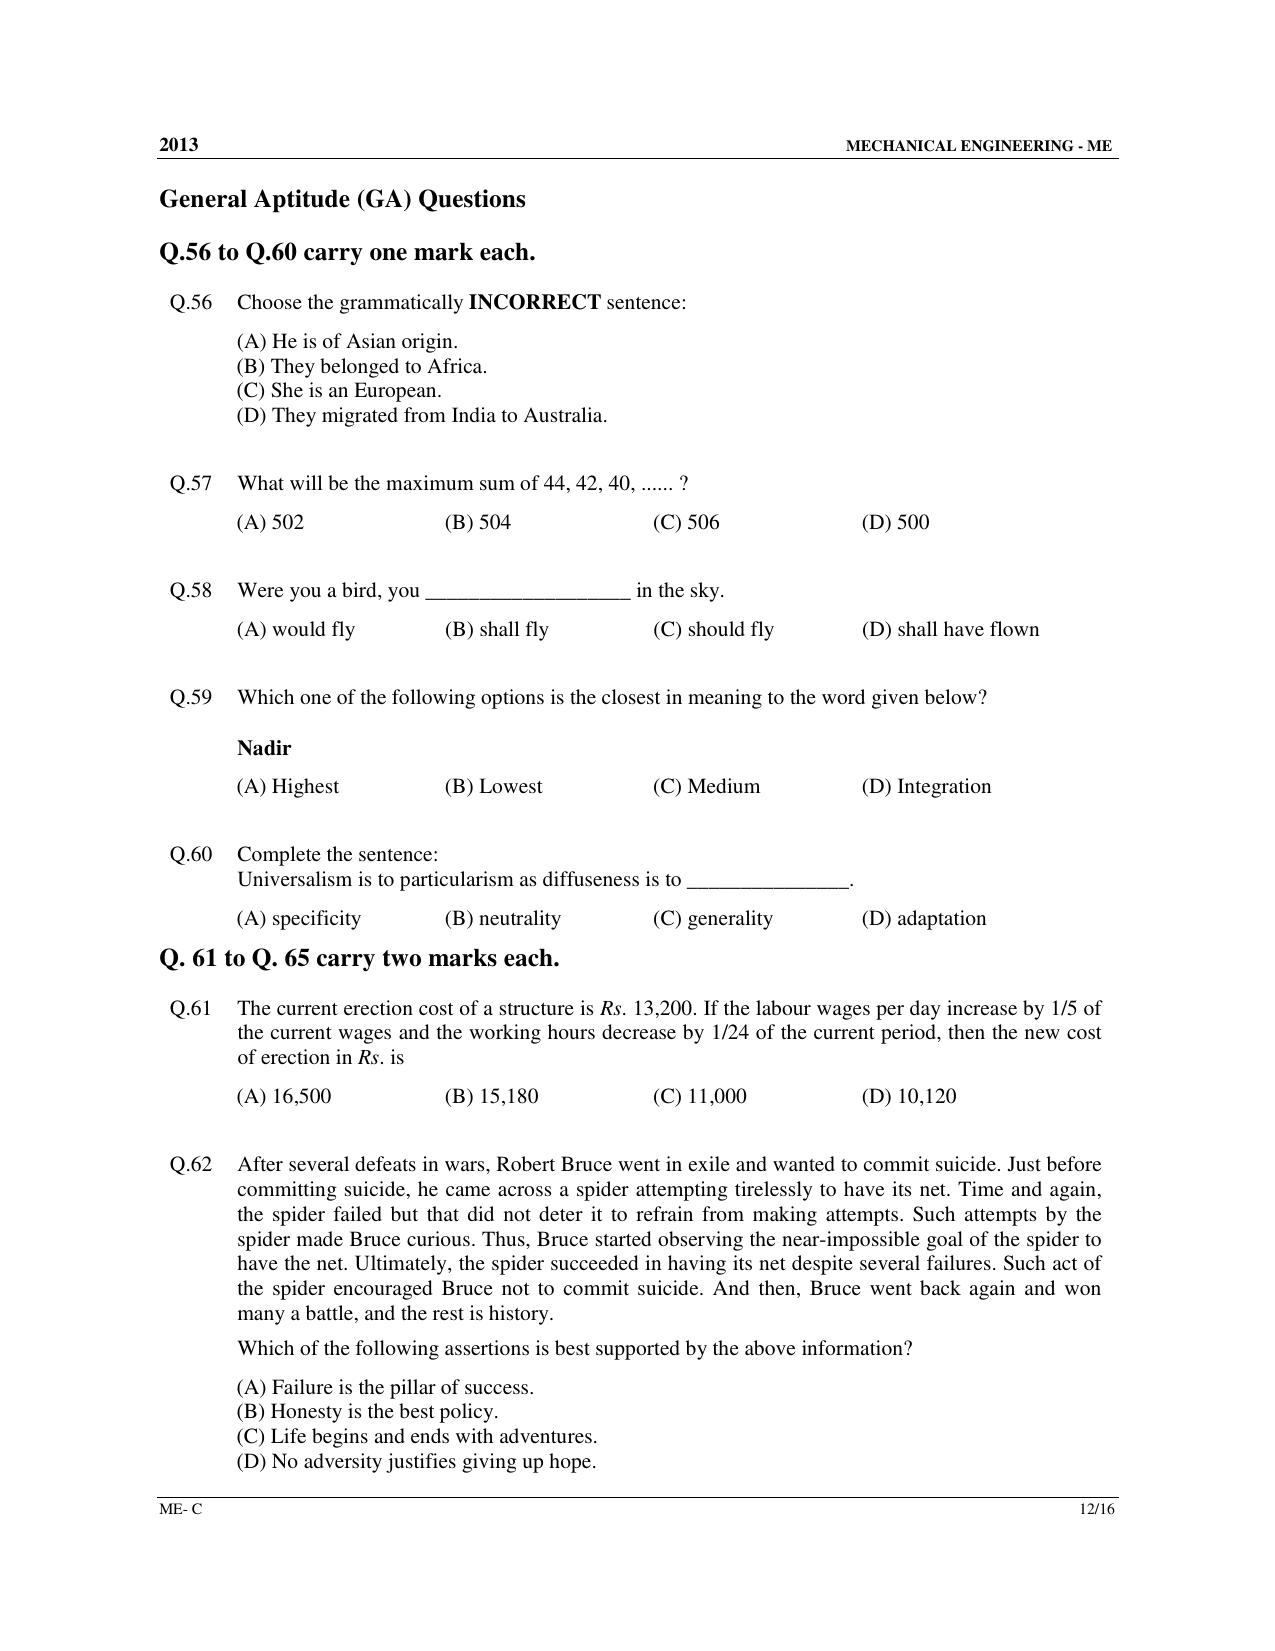 GATE 2013 Mechanical Engineering (ME) Question Paper with Answer Key - Page 41